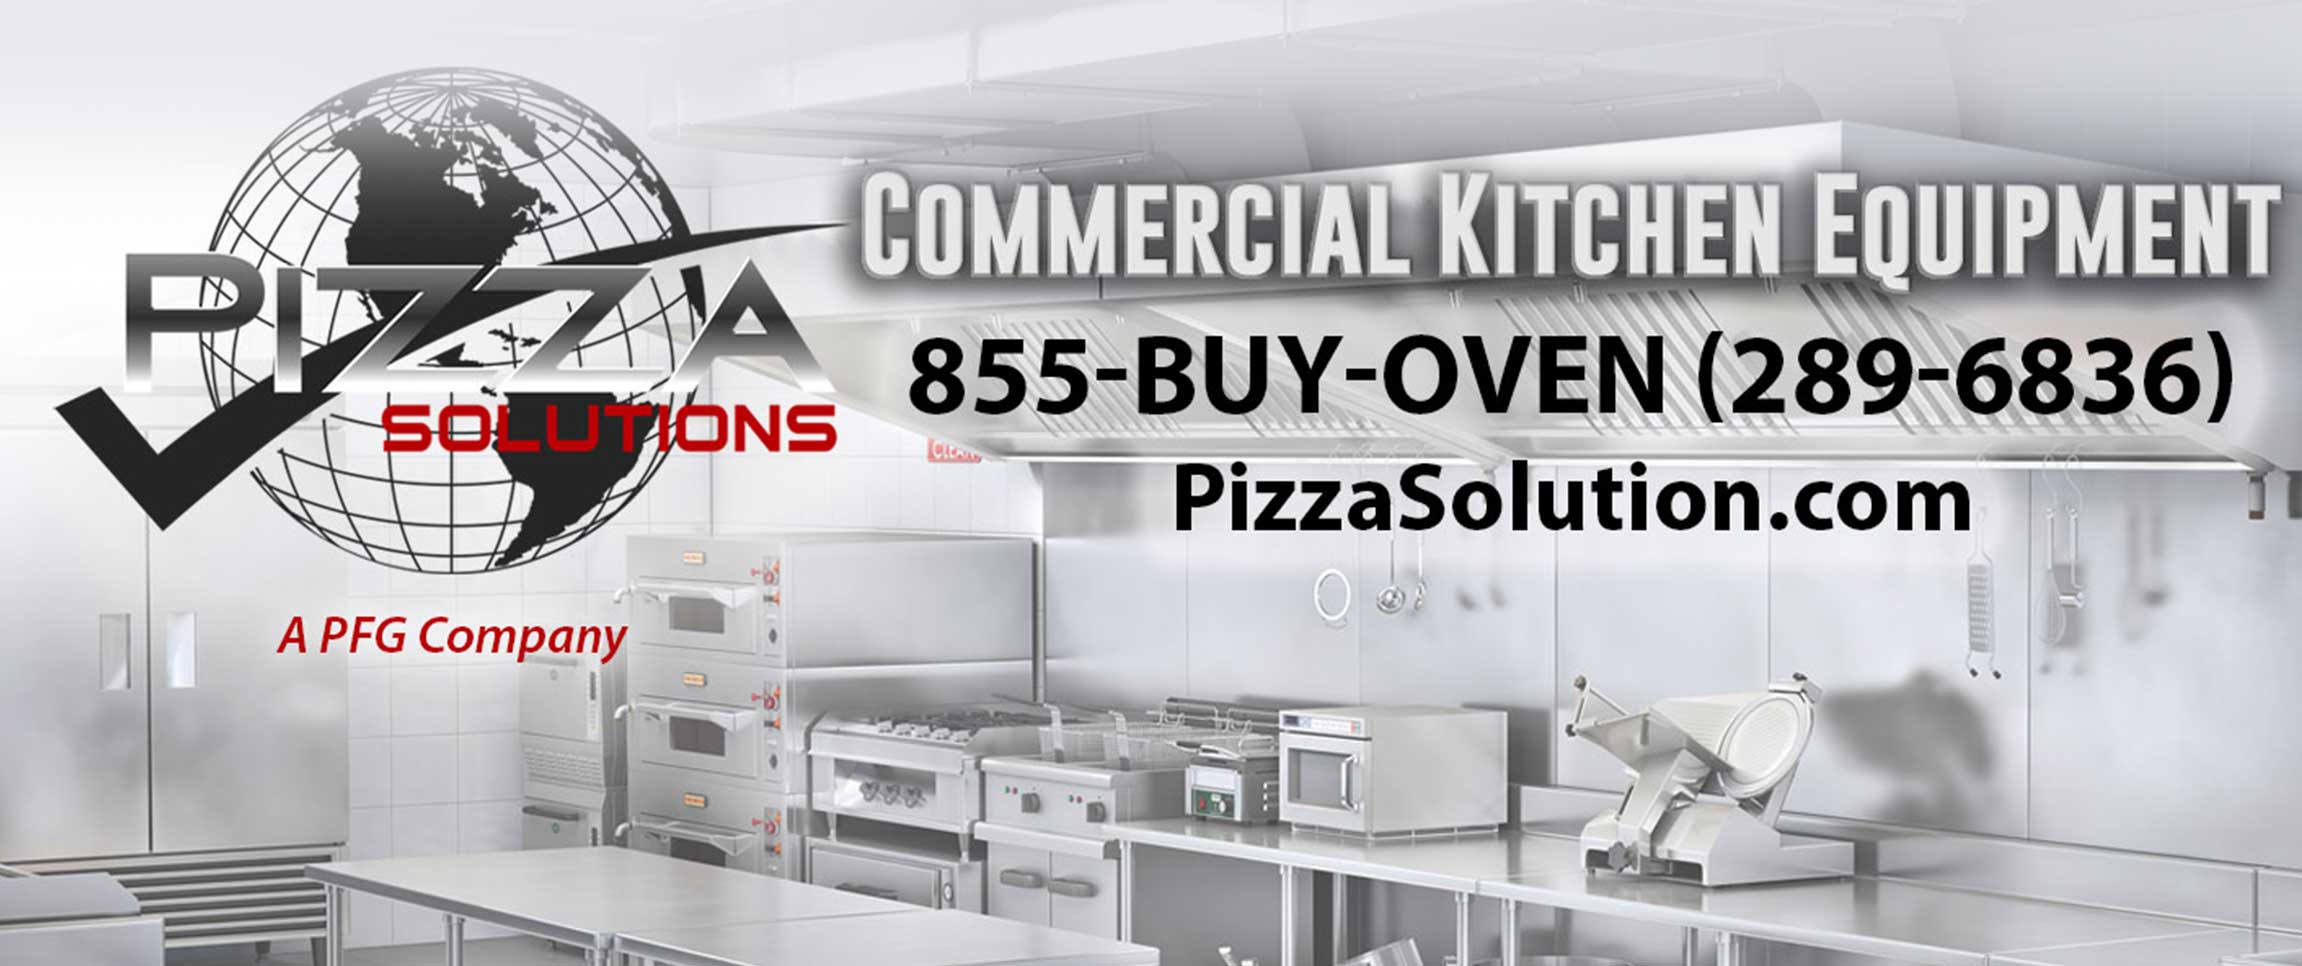 Pizza Solutions Contact Info